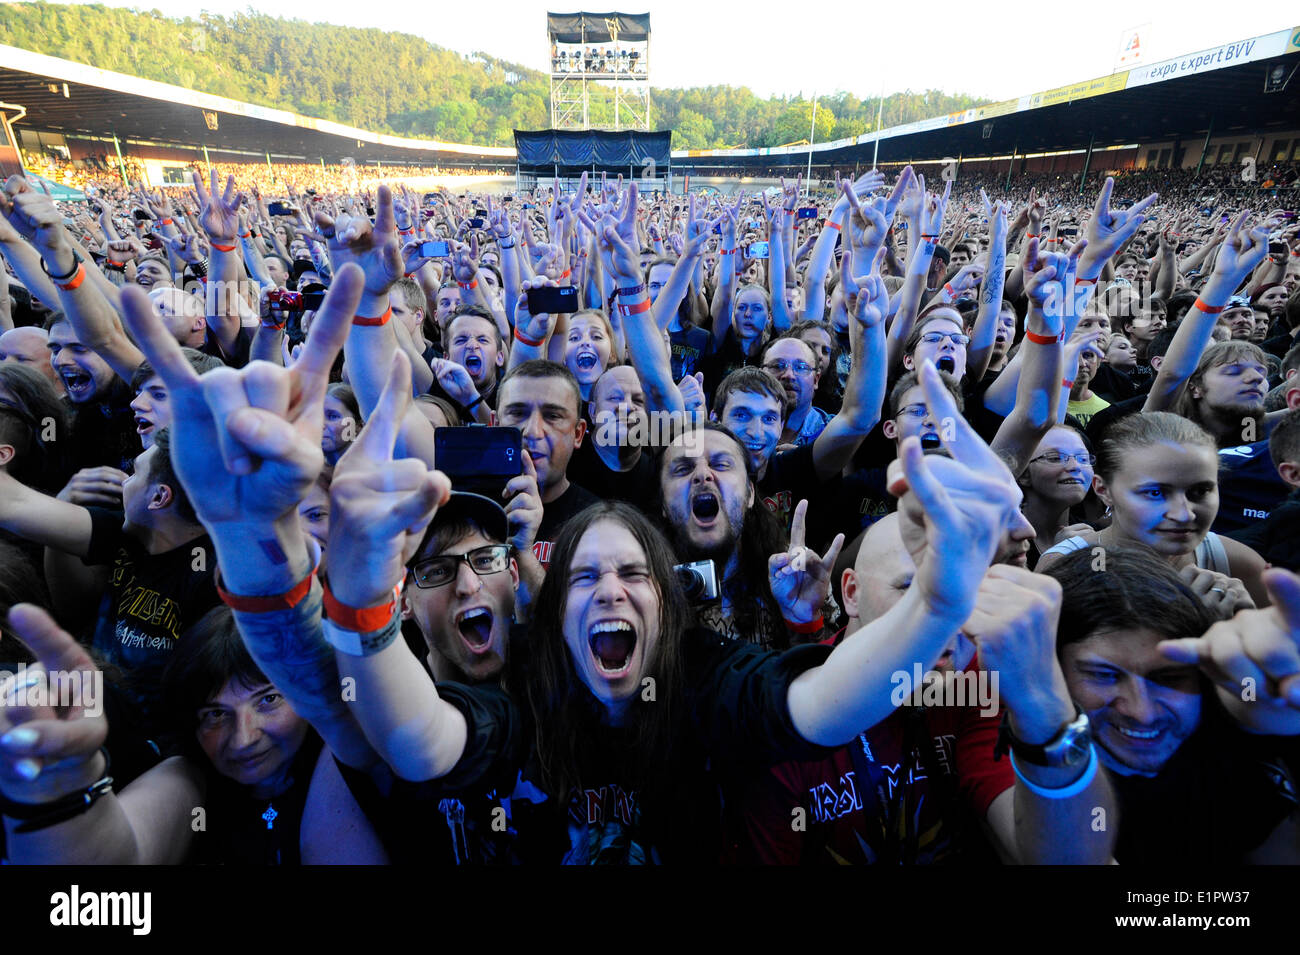 Brno, Czech Republic. 8th June, 2014. Fans of British heavymetal band Iron Maiden pictured during the concert in Brno, Czech Republic, June 8, 2014. The band visited Brno in the tour Maiden England. Credit:  Vaclav Salek/CTK Photo/Alamy Live News Stock Photo